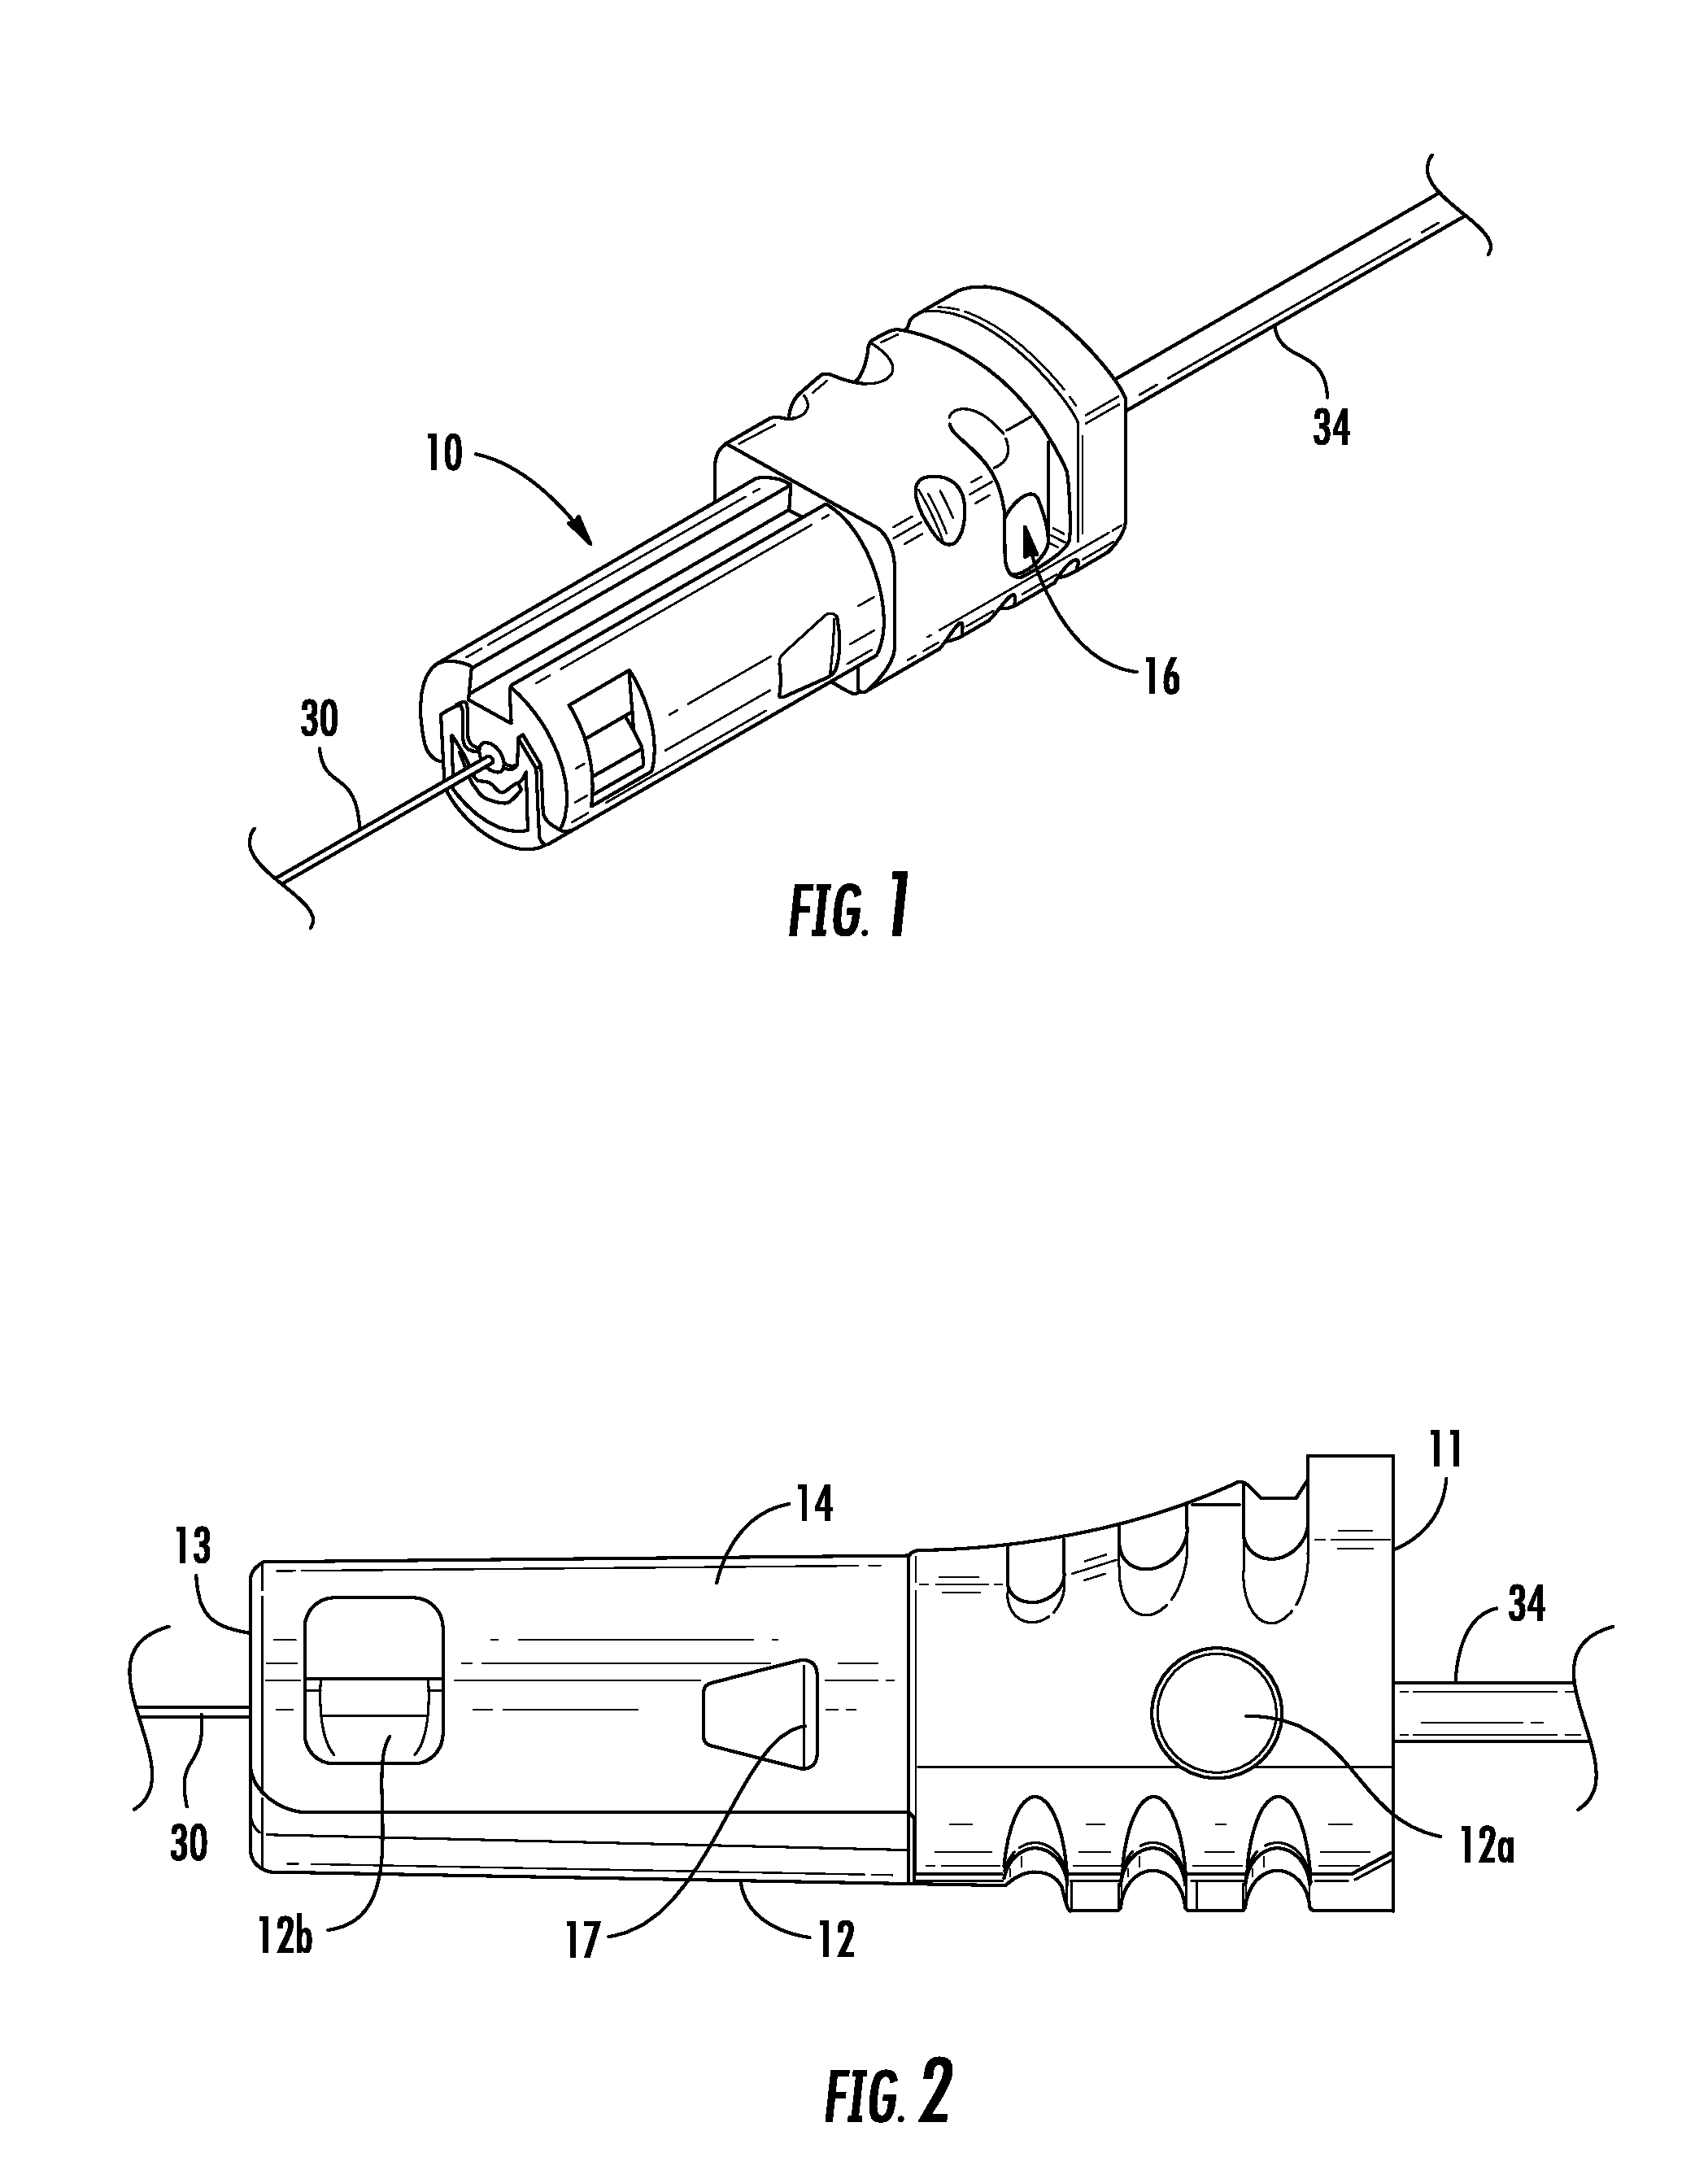 Fiber optic connector of a fiber optic connection termination system